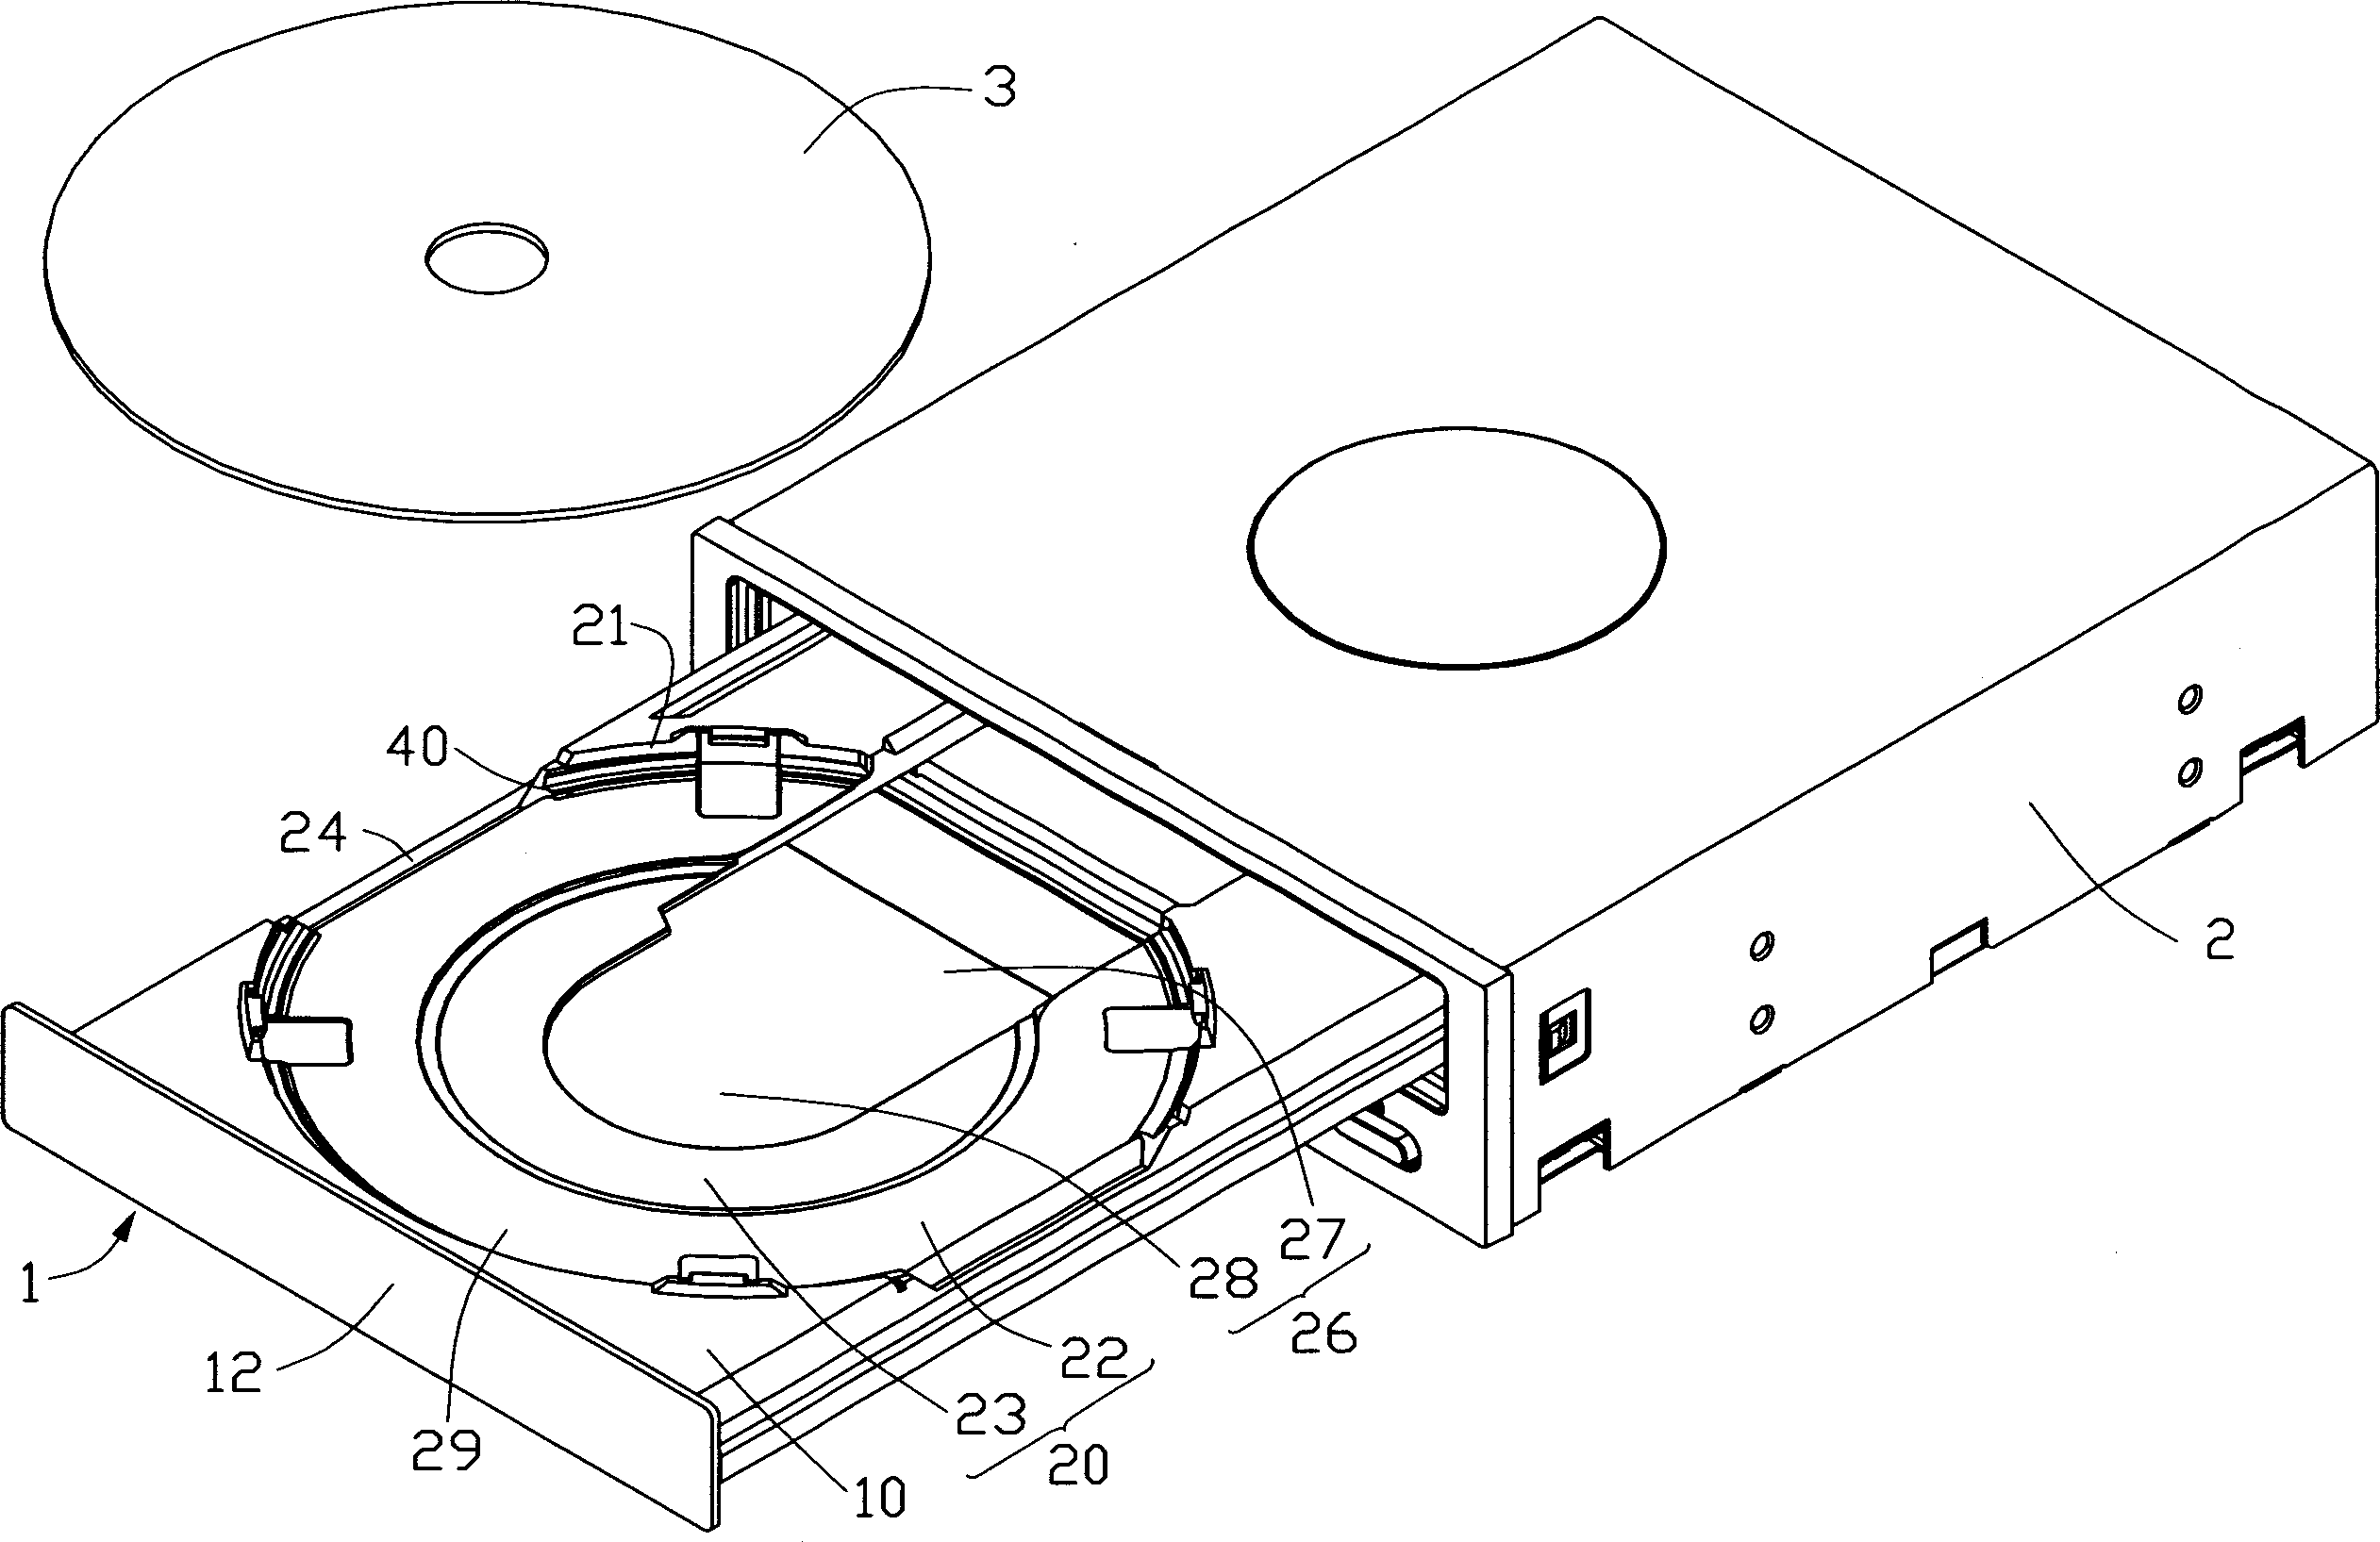 CD drive disc and its manufacturing method